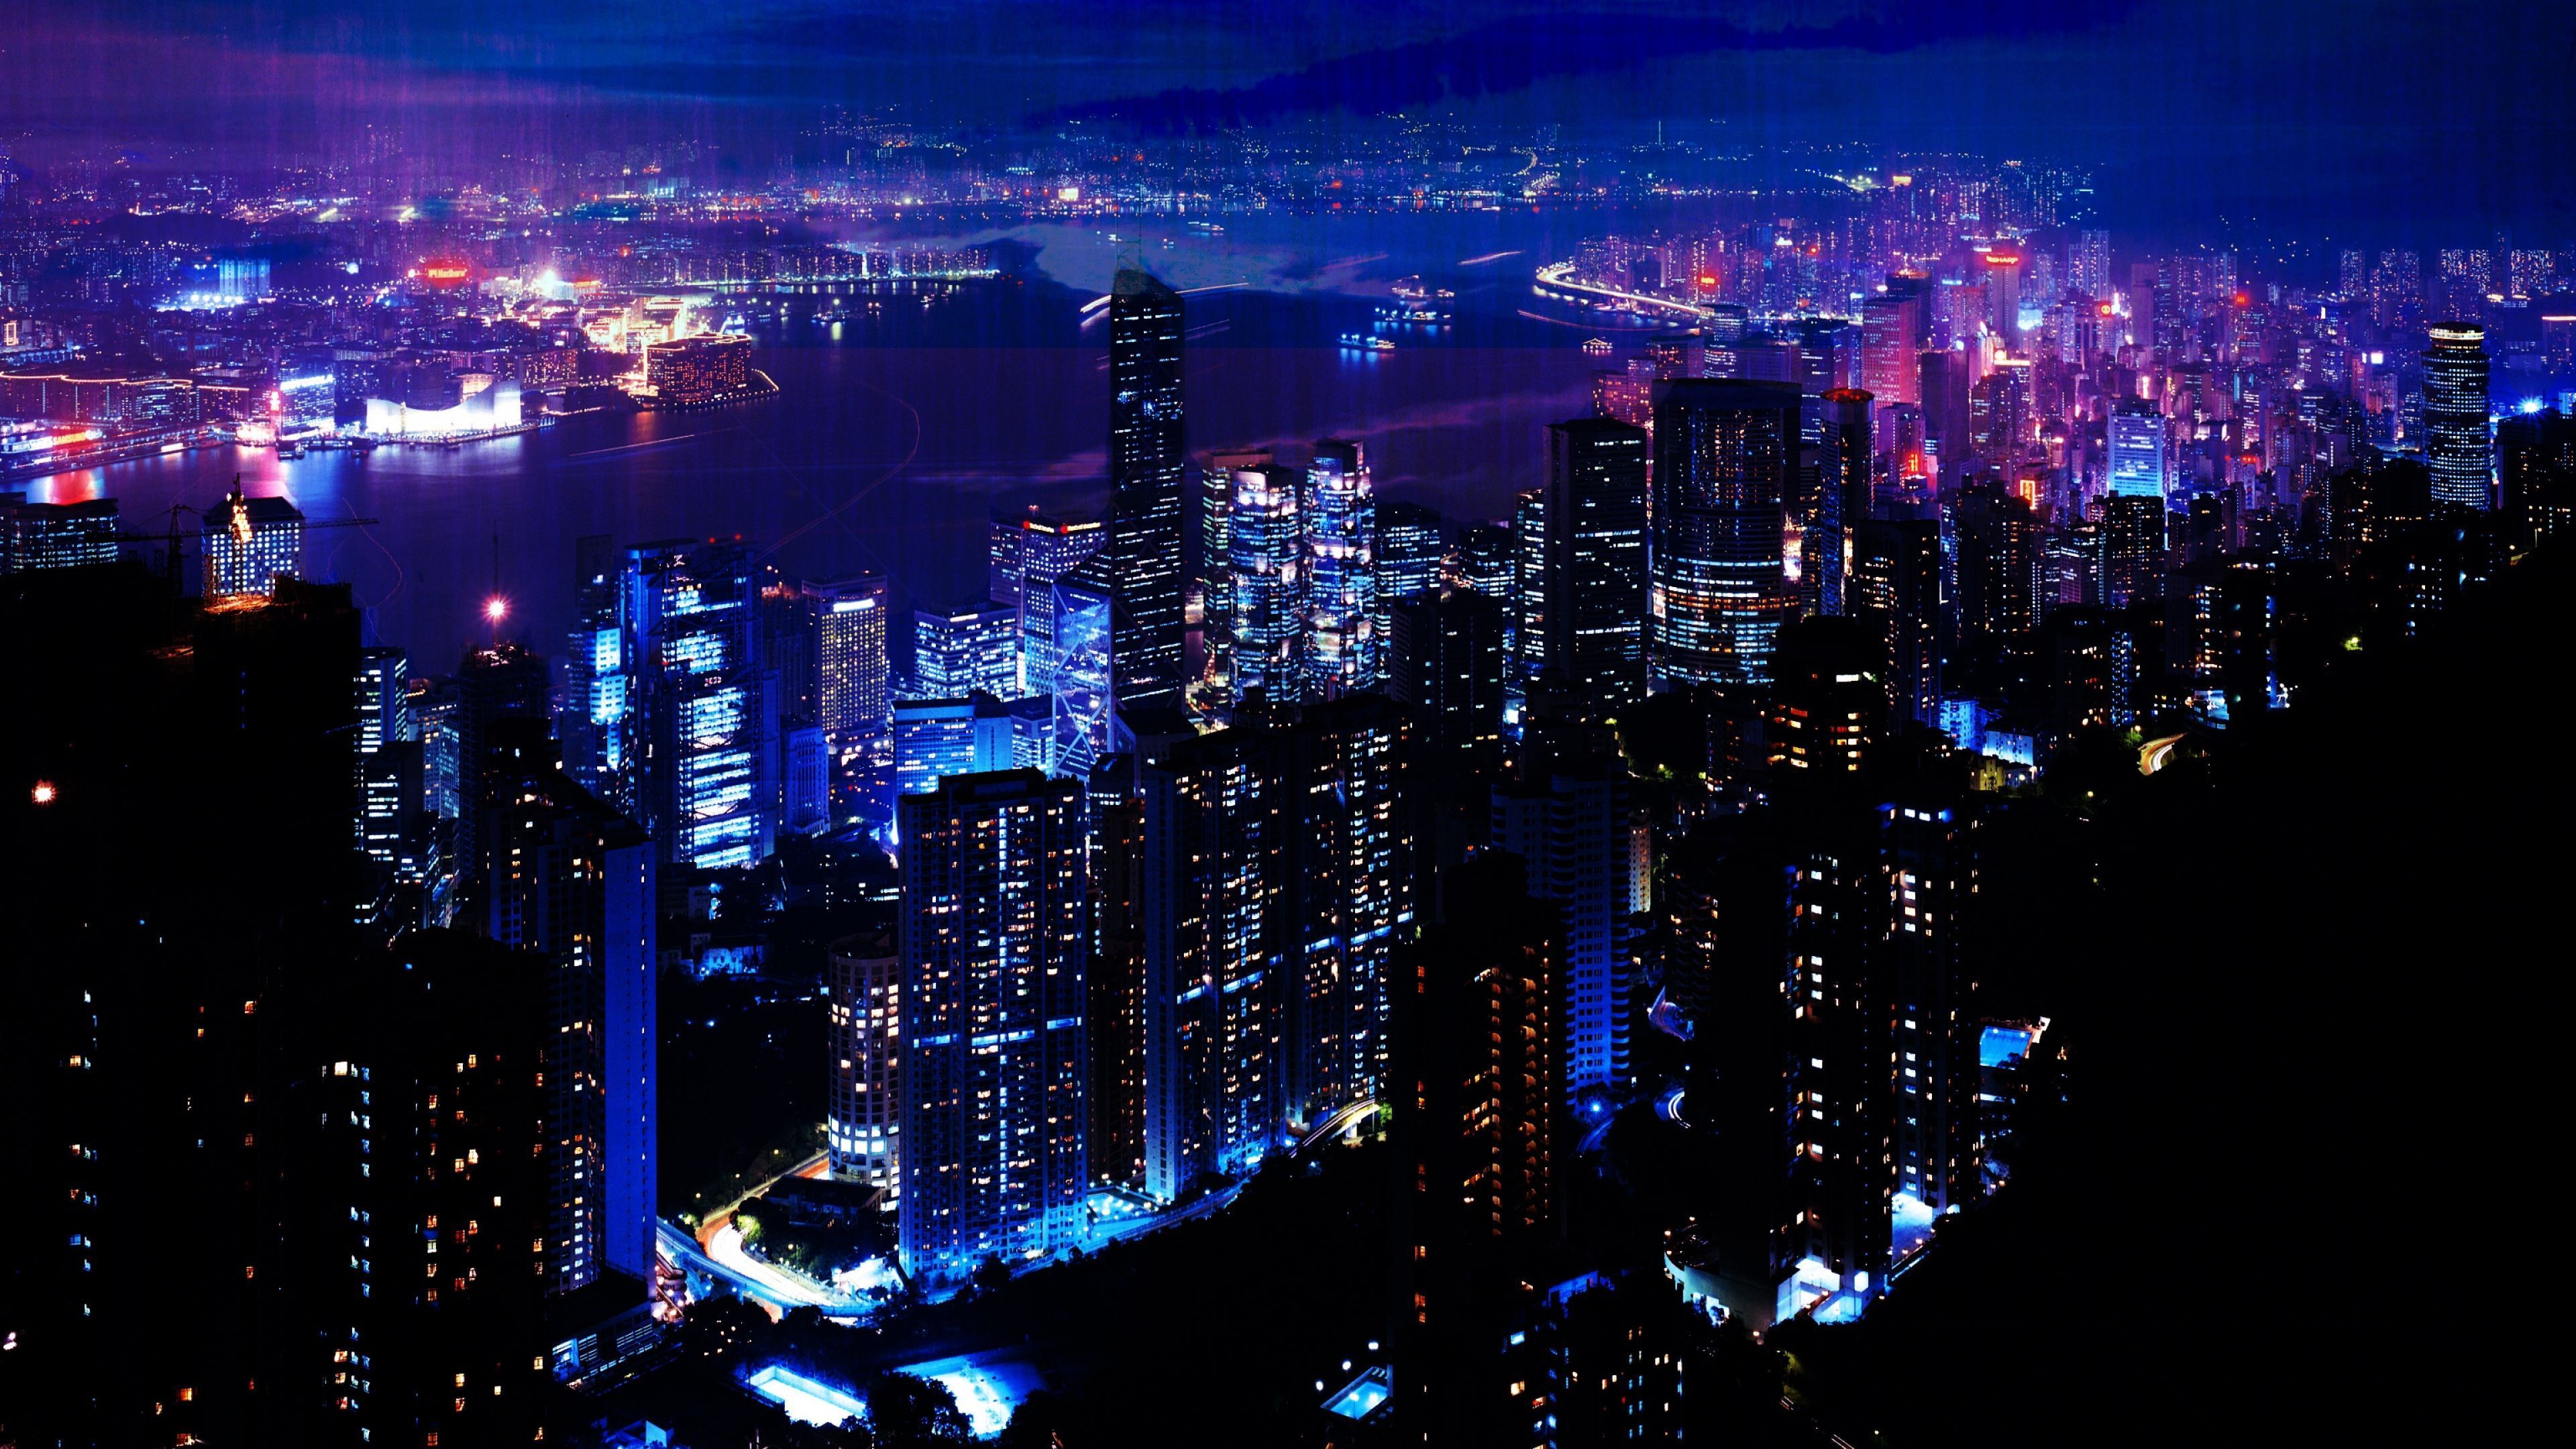 A cityscape at night with bright blue and purple lights illuminating the buildings. - 3840x2160